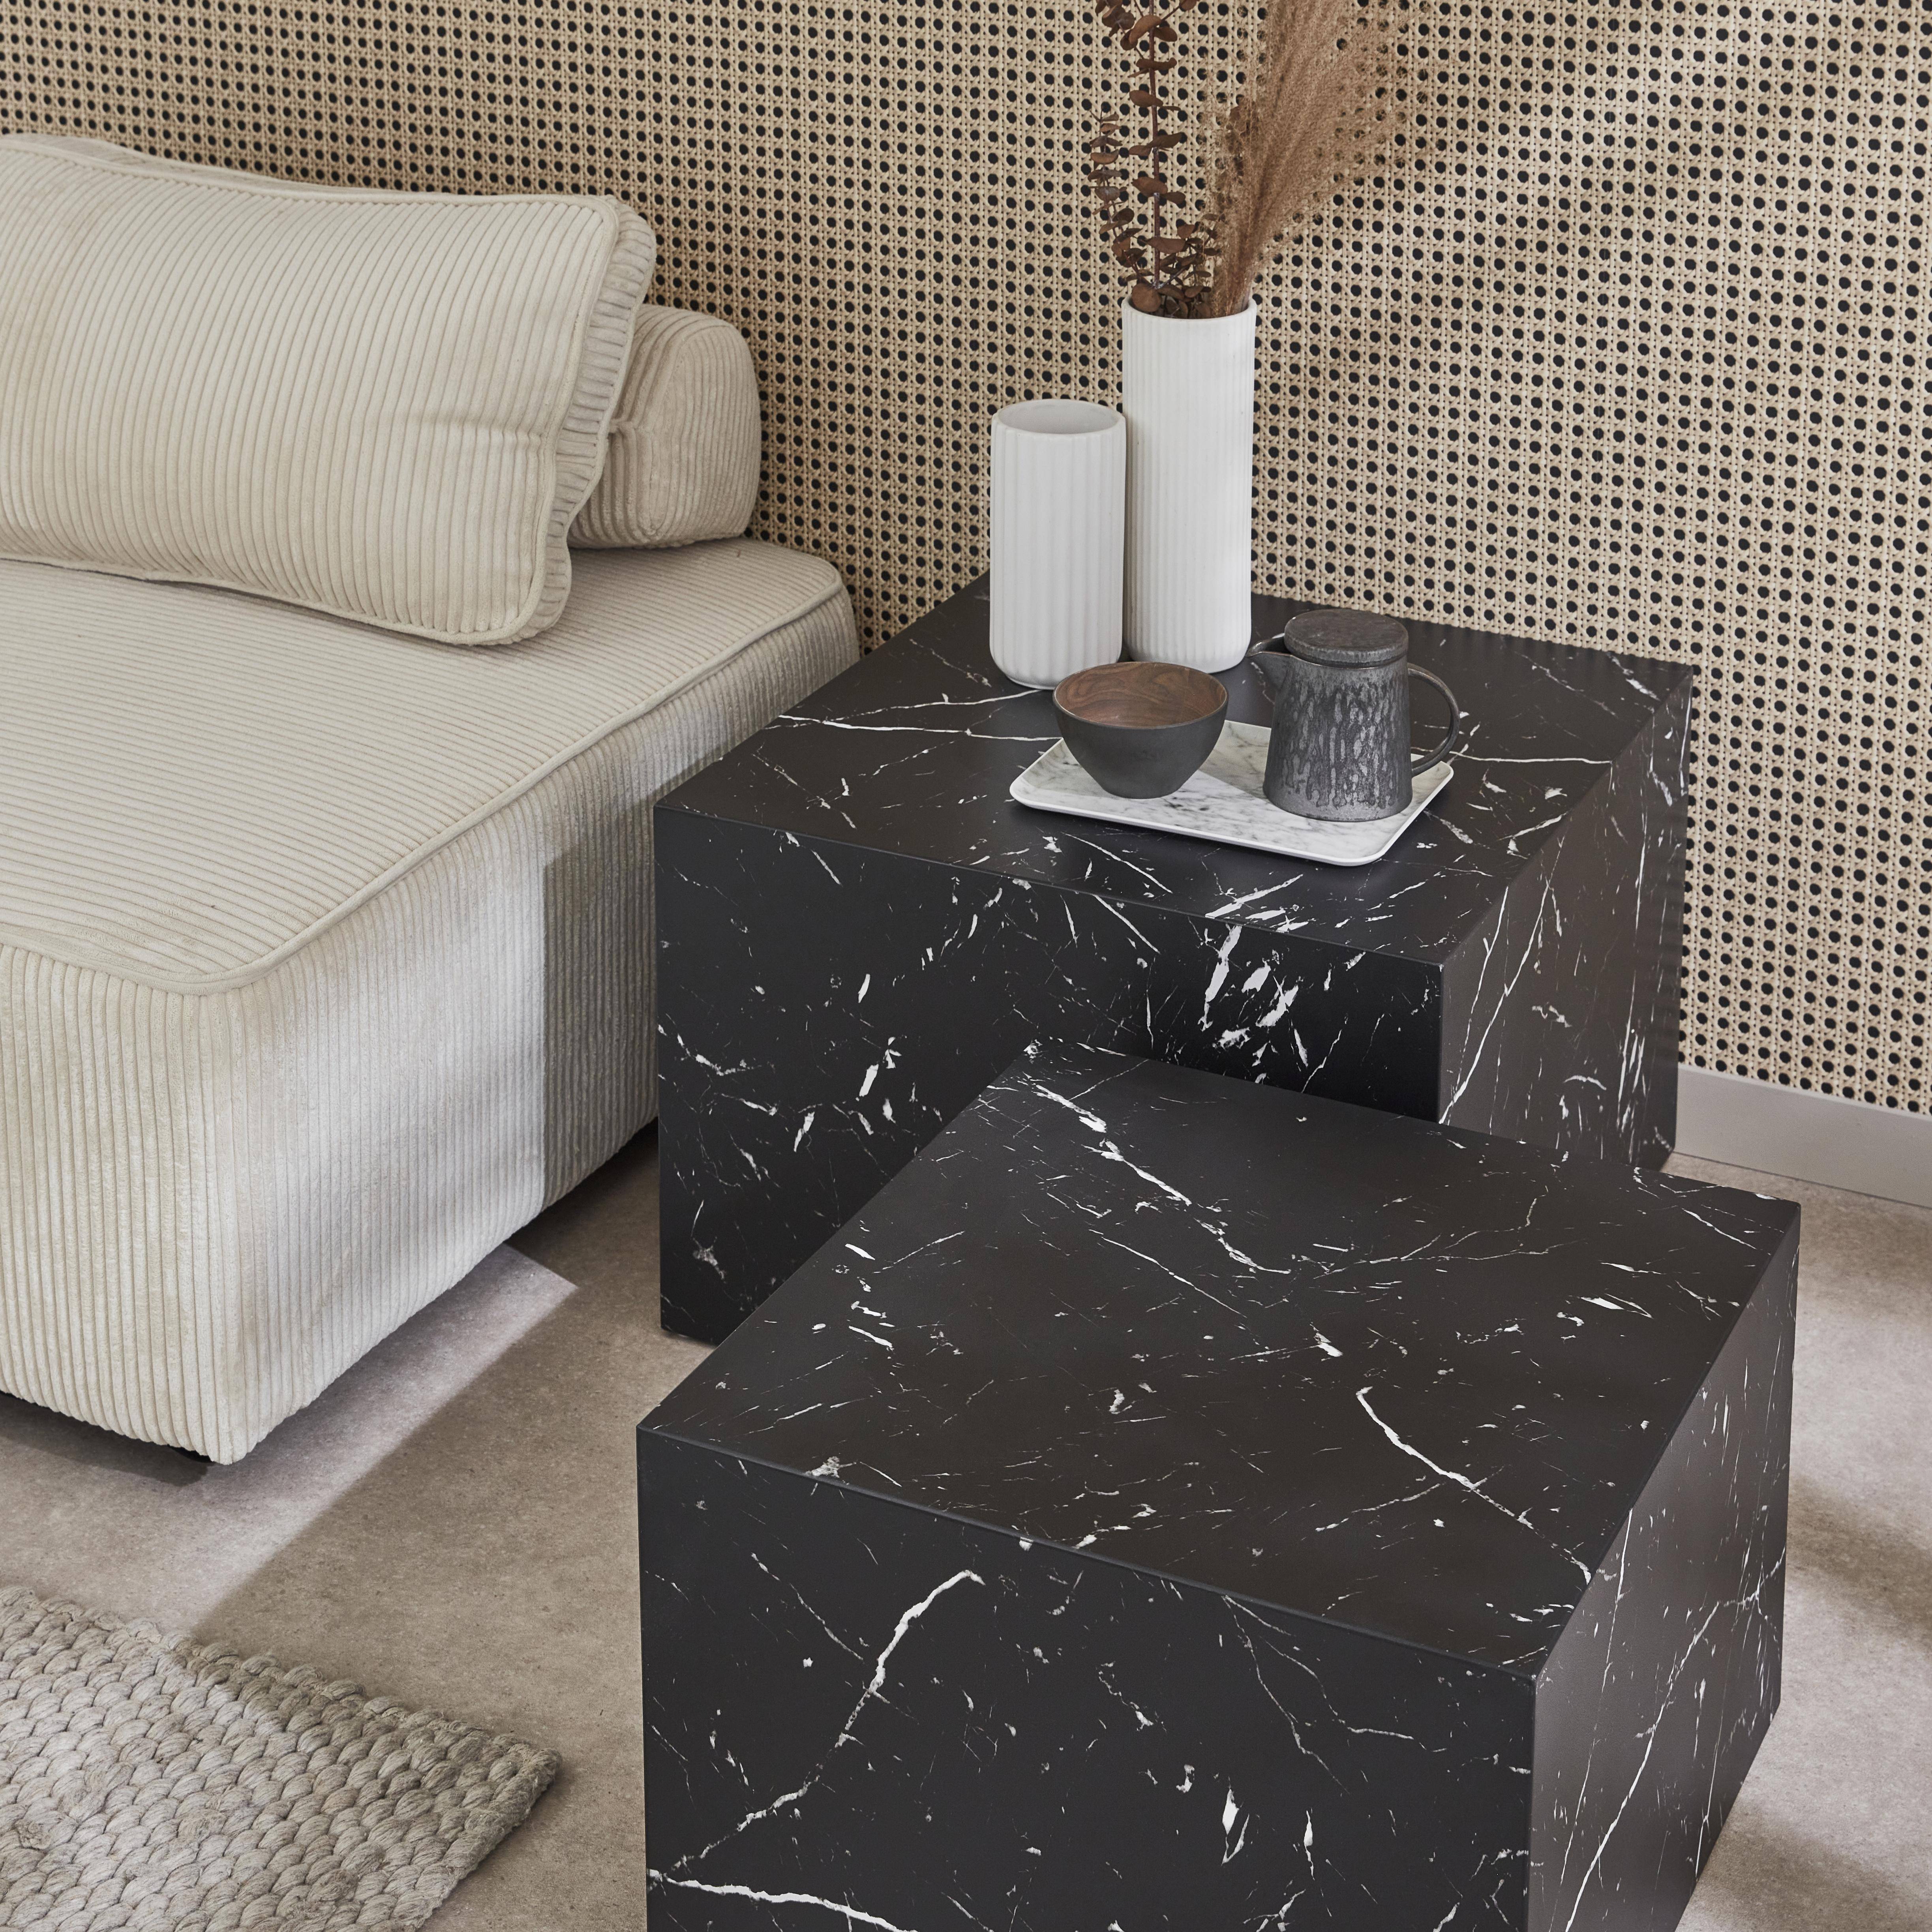 Set of 2 square coffee tables with marble effect, black, L50xW50xH33cm &  L58xW58xH40cm, Paros Photo2